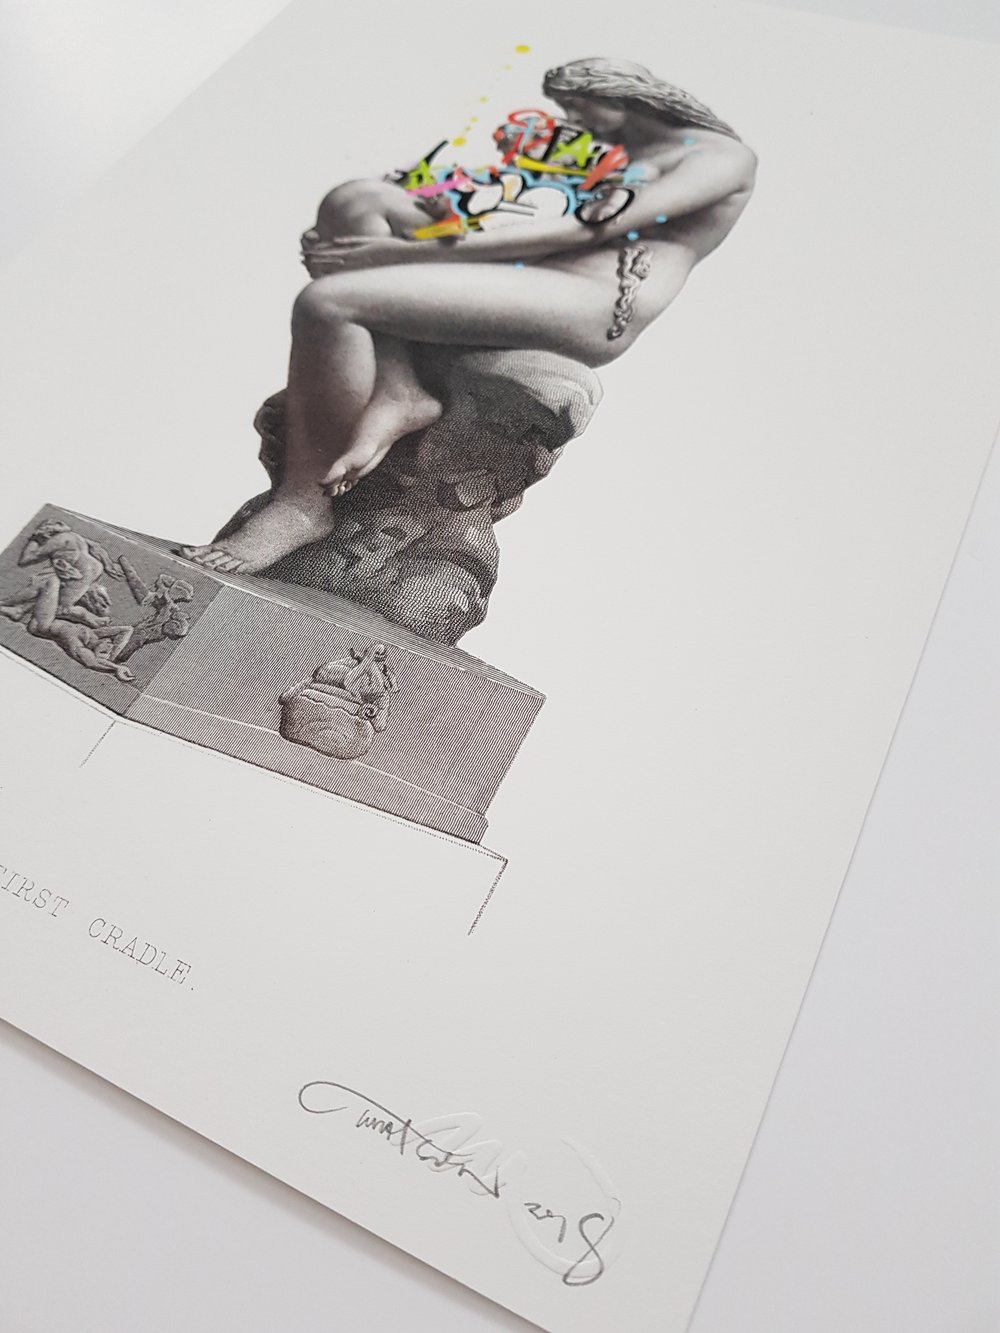 MARTIN WHATSON - THE FIRST CRADLE - 35CM X 25CM - HAND FINISHED LTD ED 50 EACH UNIQUE 